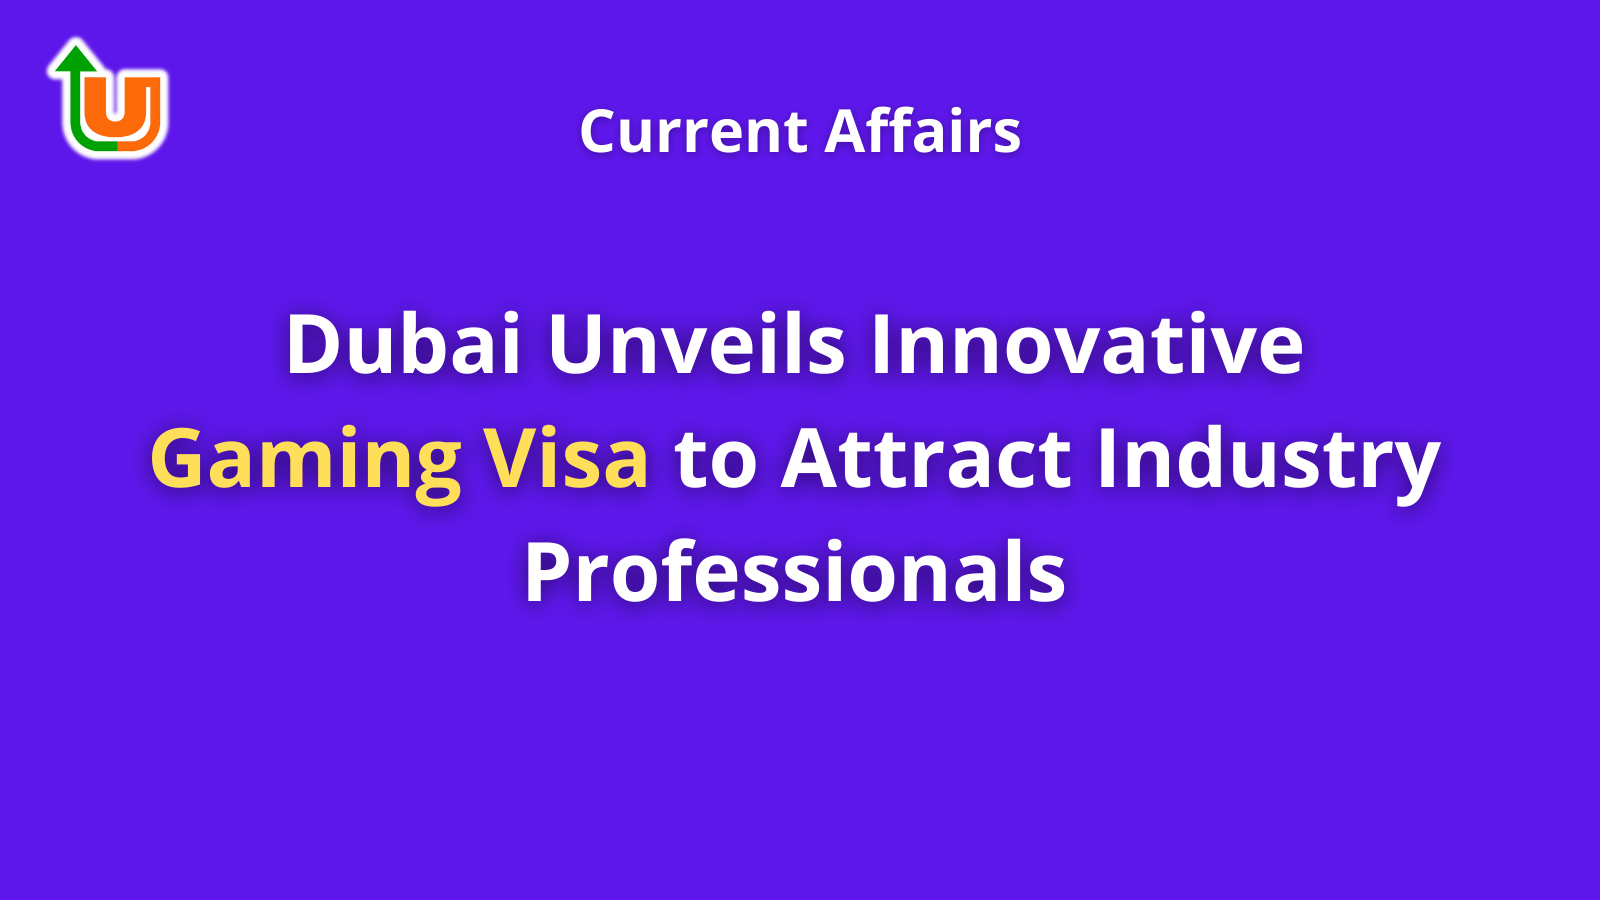 Dubai Unveils Innovative Gaming Visa to Attract Industry Professionals